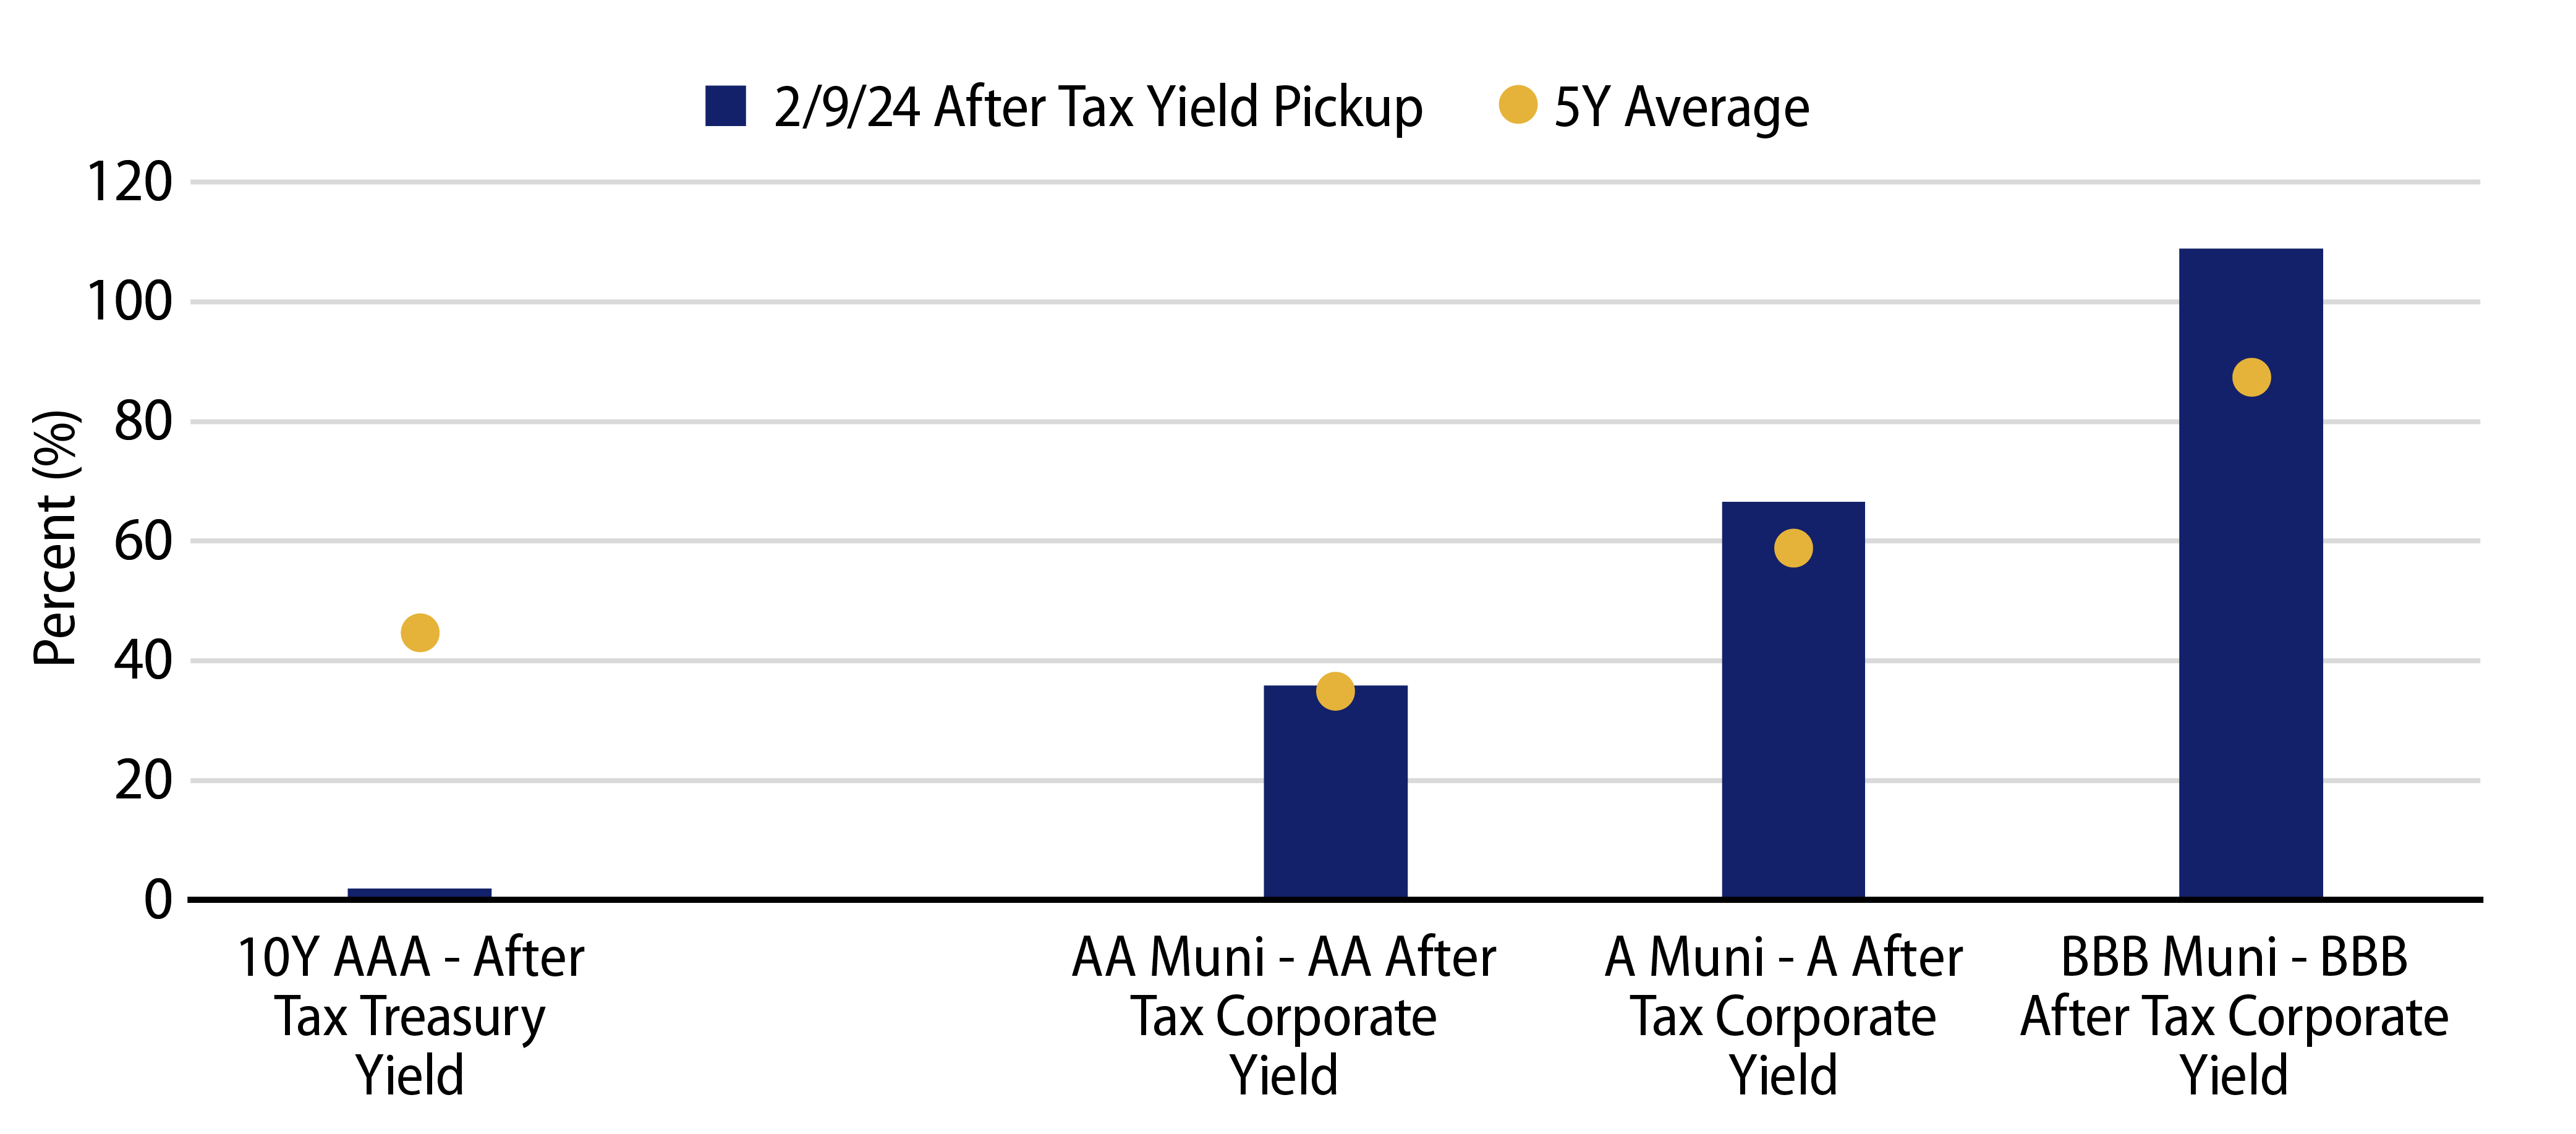 After-Tax Yield Pickup vs. the 5-Year Average